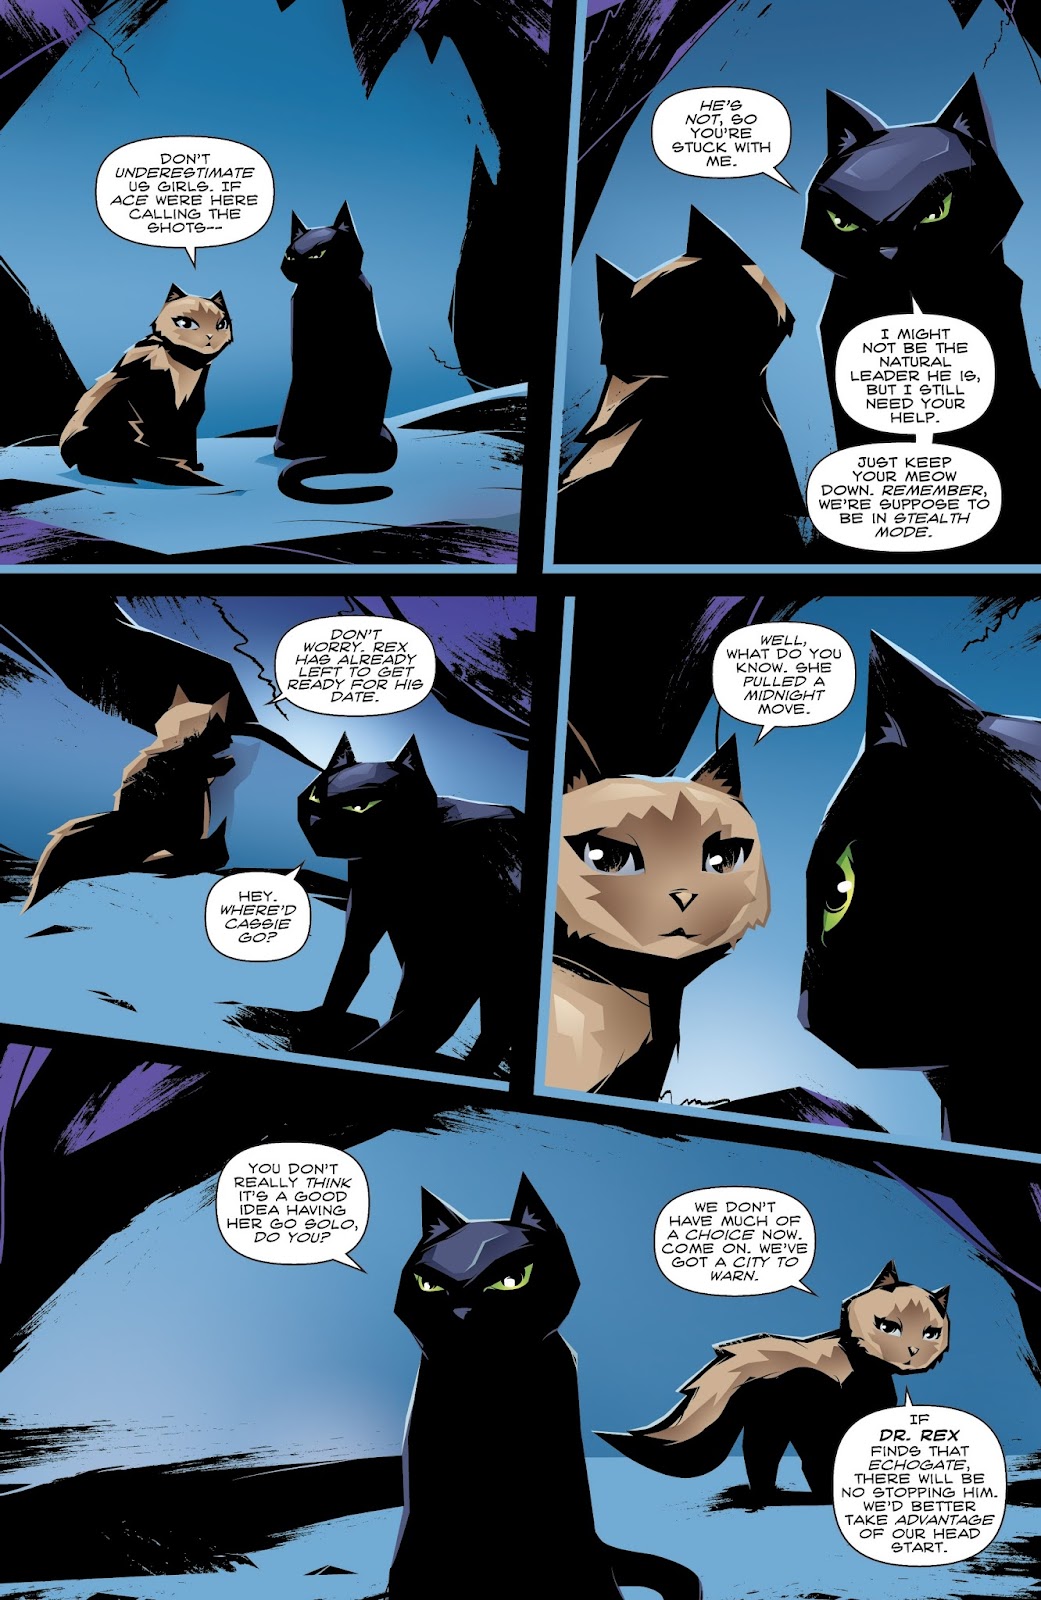 Hero Cats: Midnight Over Stellar City Vol. 2 issue 2 - Page 22